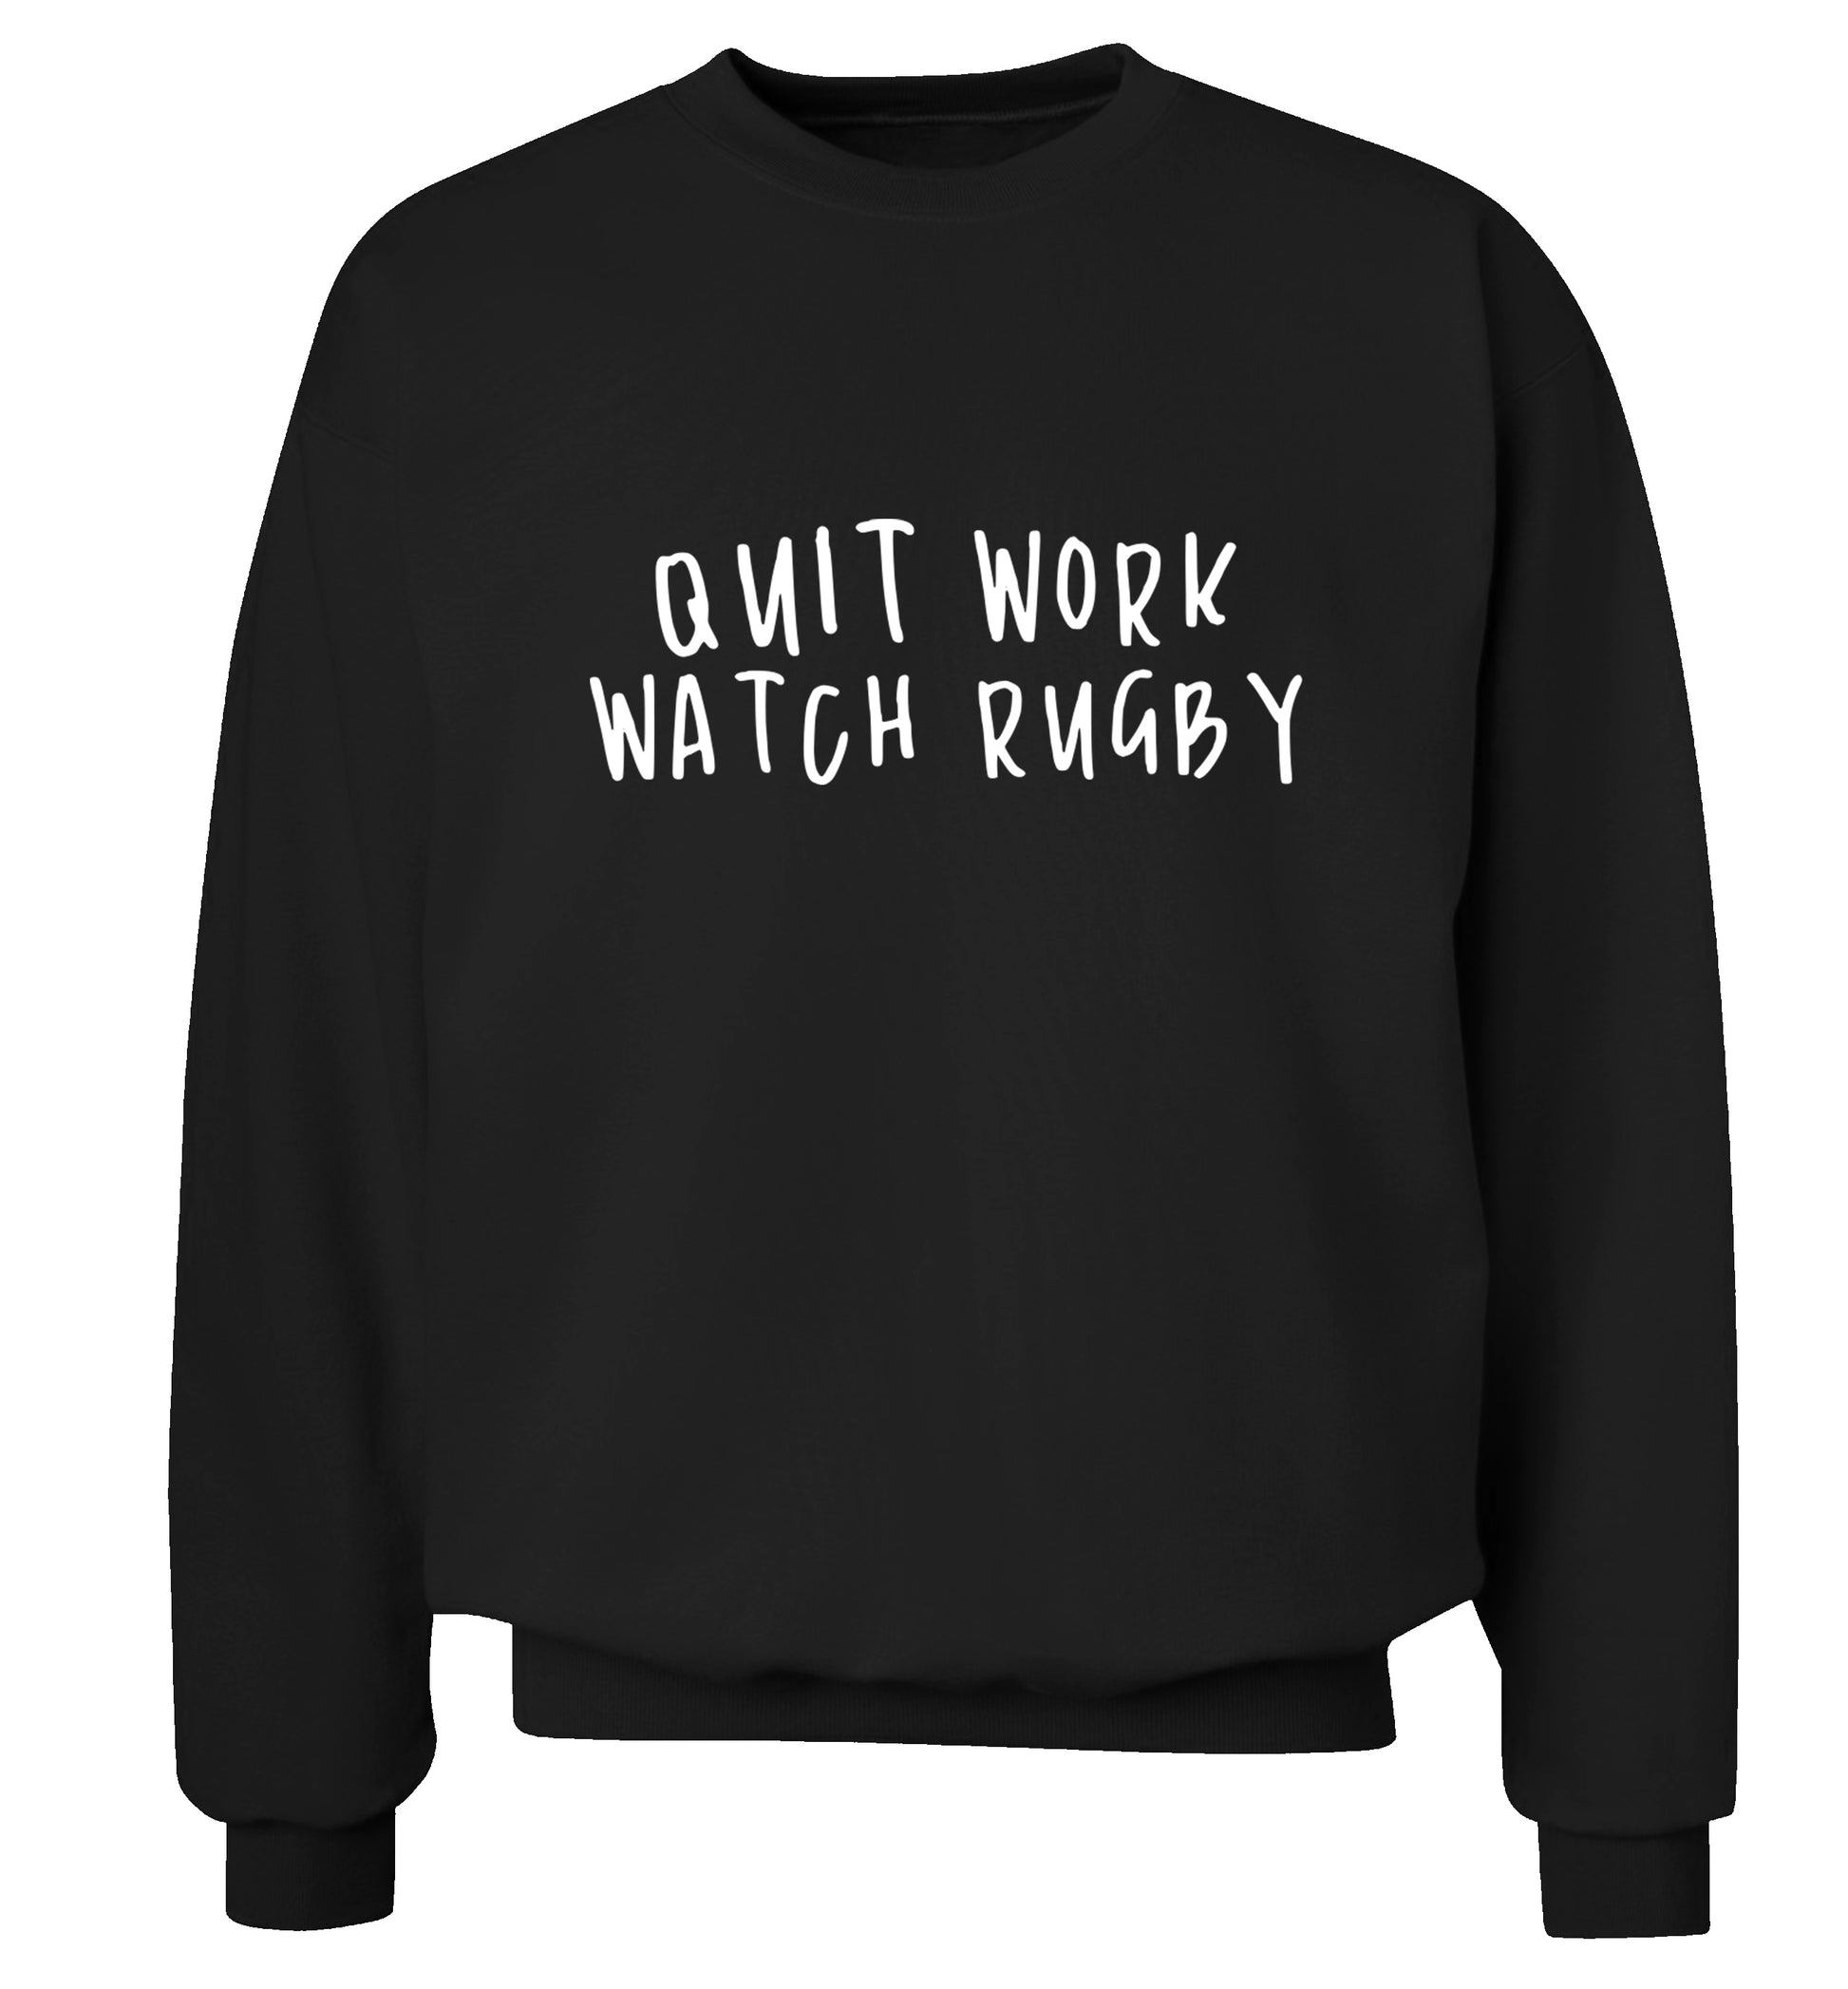 Quit work watch rugby Adult's unisex black Sweater 2XL